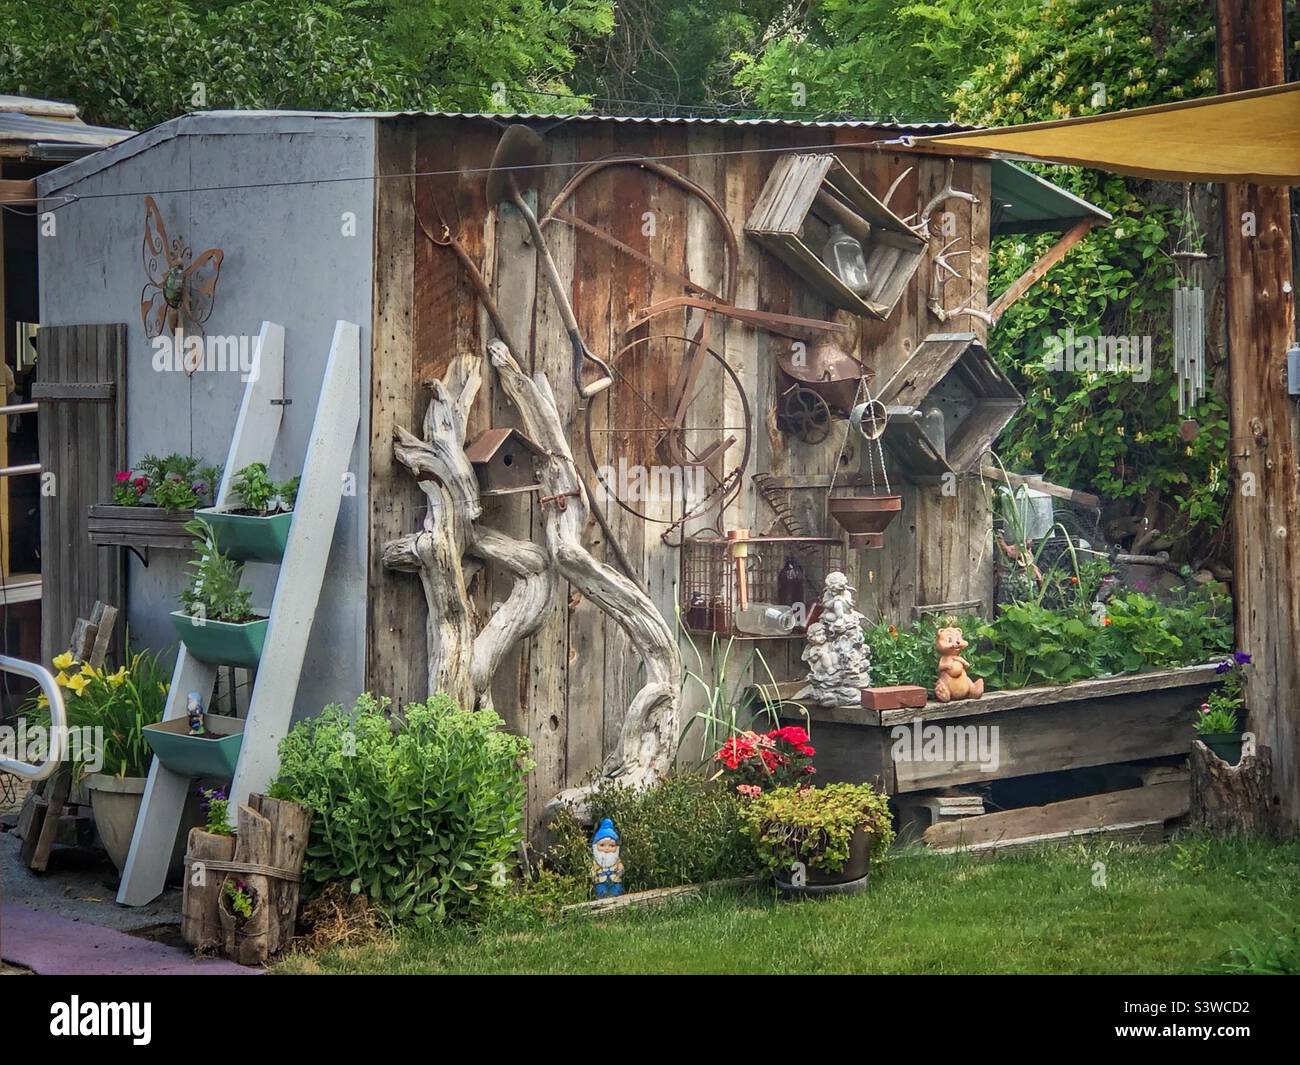 Vintage metal tools, wheels, wooden boxes, and driftwood are artistically arranged on the side of a shed Stock Photo